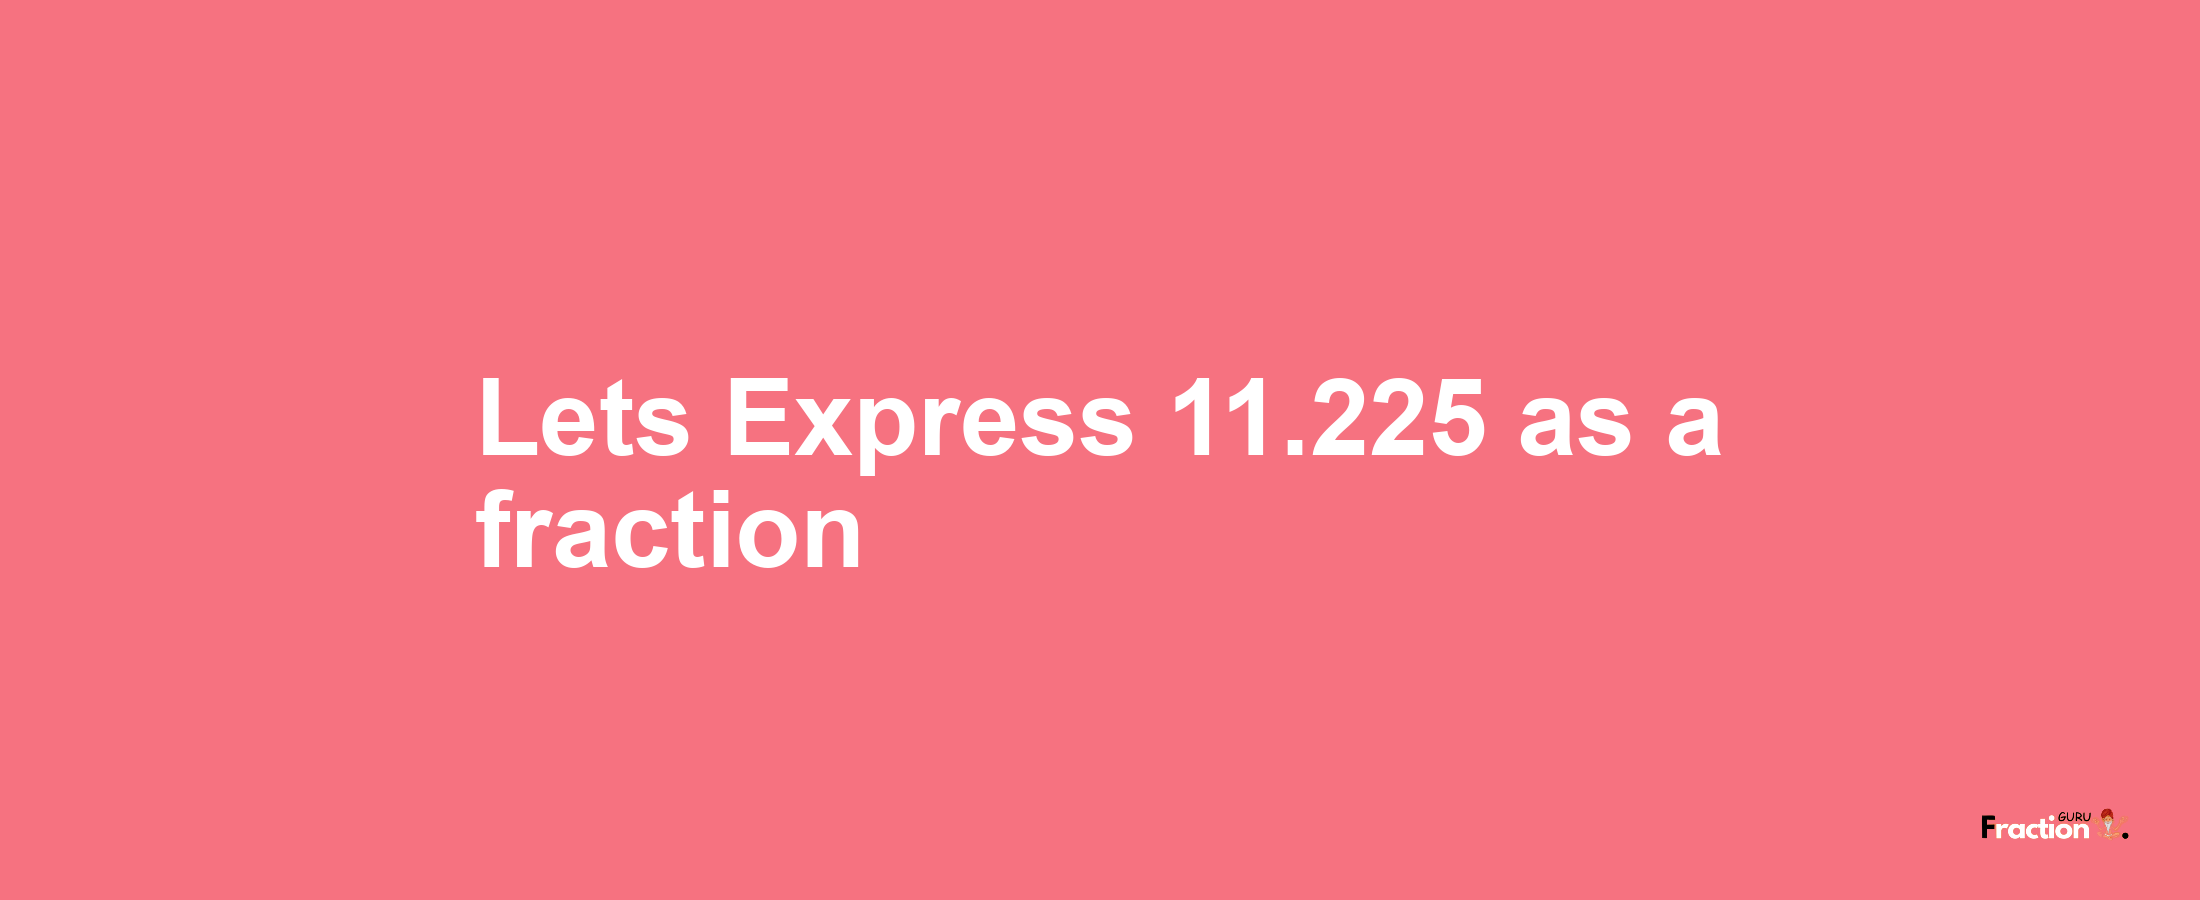 Lets Express 11.225 as afraction